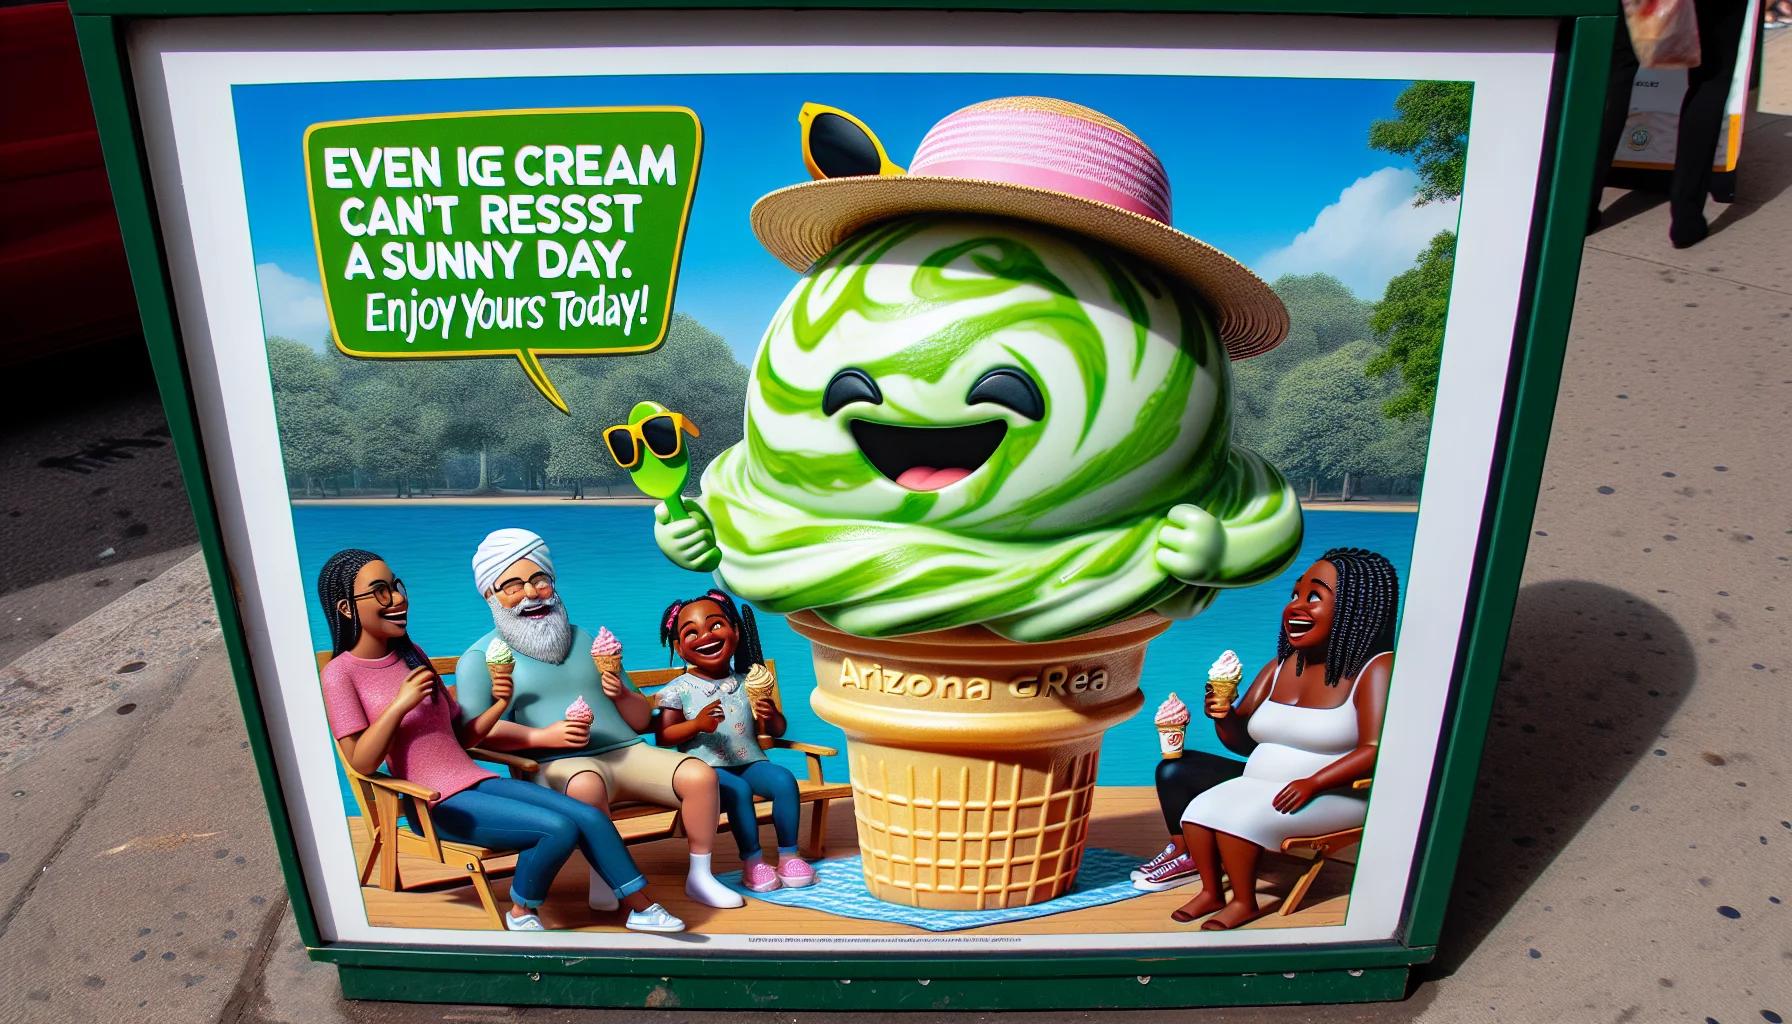 Imagine a humorous scene set at a sunny park picnic. There's a realistic, delightfully scrumptious scoop of Arizona green tea ice cream. Its enticing vibrant green swirls contrast beautifully with the pastel pink of the ice cream cone. The ice cream has a tiny sunhat and sunglasses on it, personifying it as if it's enjoying a day out. A few park goers, a Middle-Eastern man, a black woman, and a Hispanic kid, are joyfully astonished by this sight, their chuckles contagiously spreading to the ice cream. A sign next to it reads, 'Even ice cream can't resist a sunny day. Enjoy yours today!'.